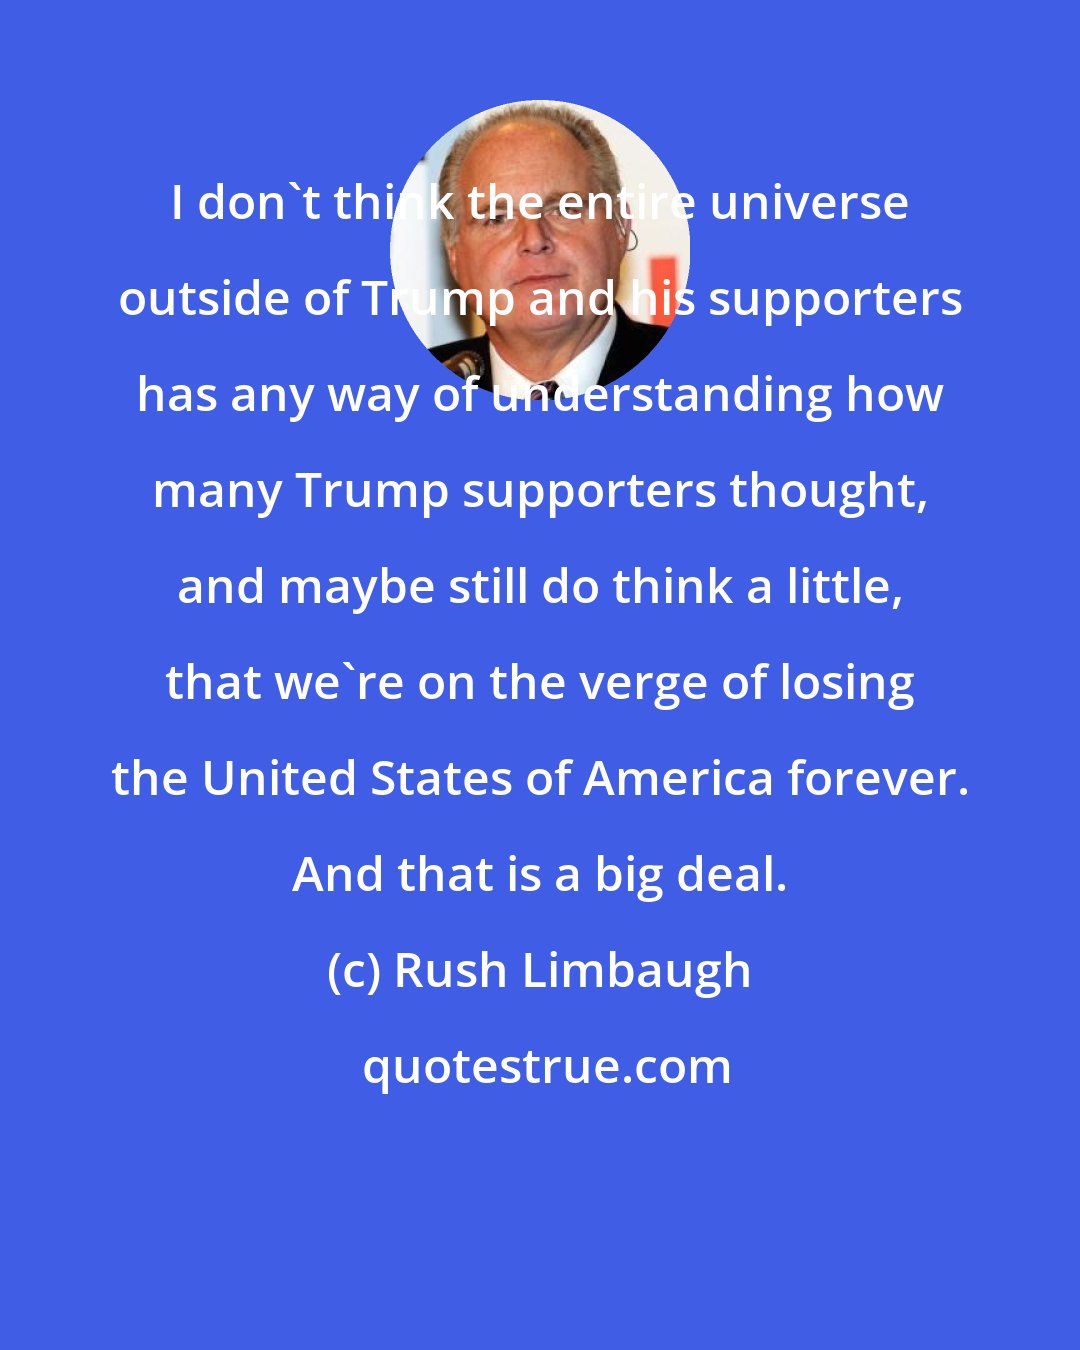 Rush Limbaugh: I don't think the entire universe outside of Trump and his supporters has any way of understanding how many Trump supporters thought, and maybe still do think a little, that we're on the verge of losing the United States of America forever. And that is a big deal.